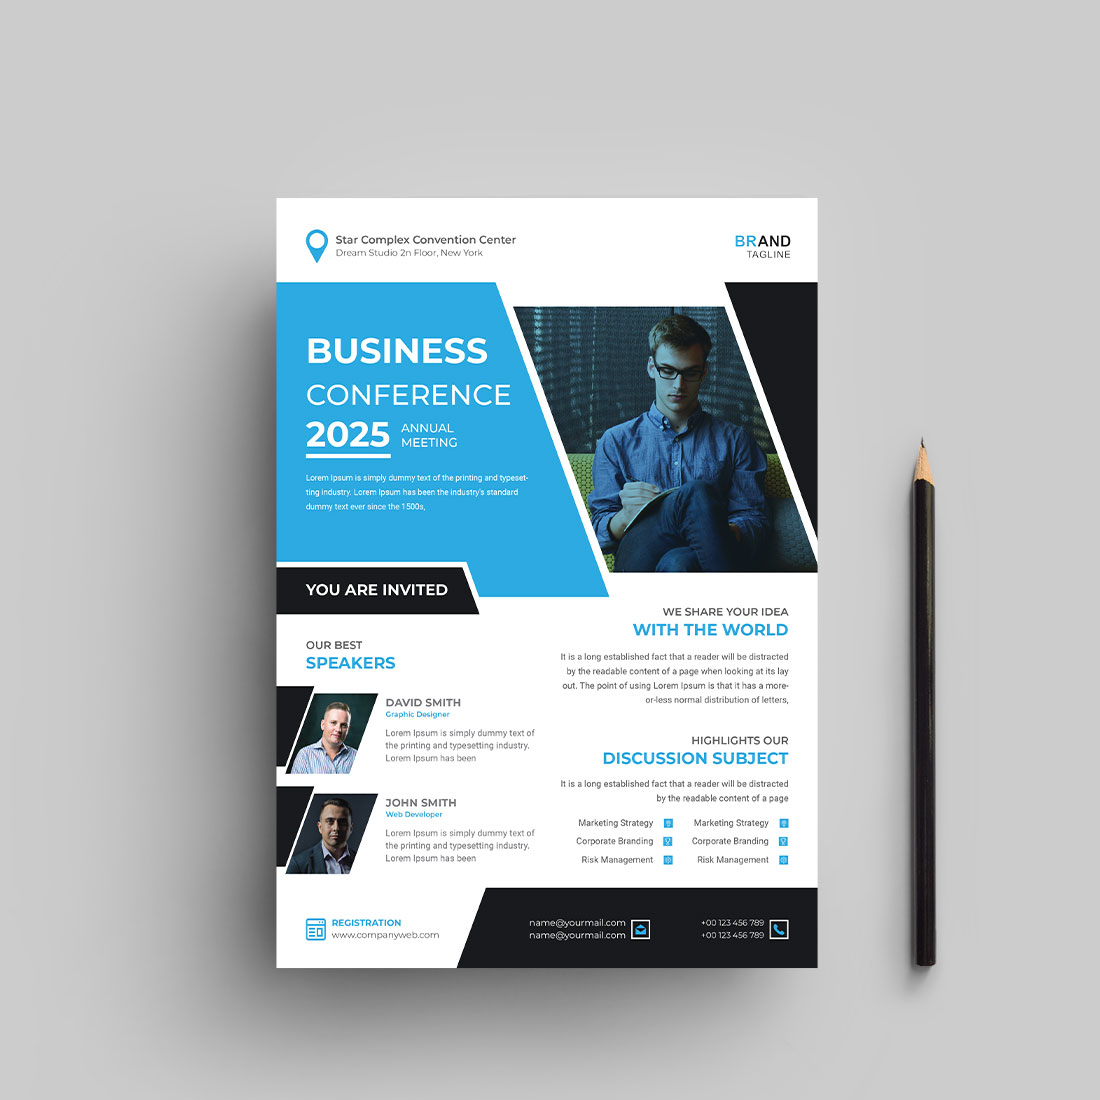 Business conference flyer design template cover image.